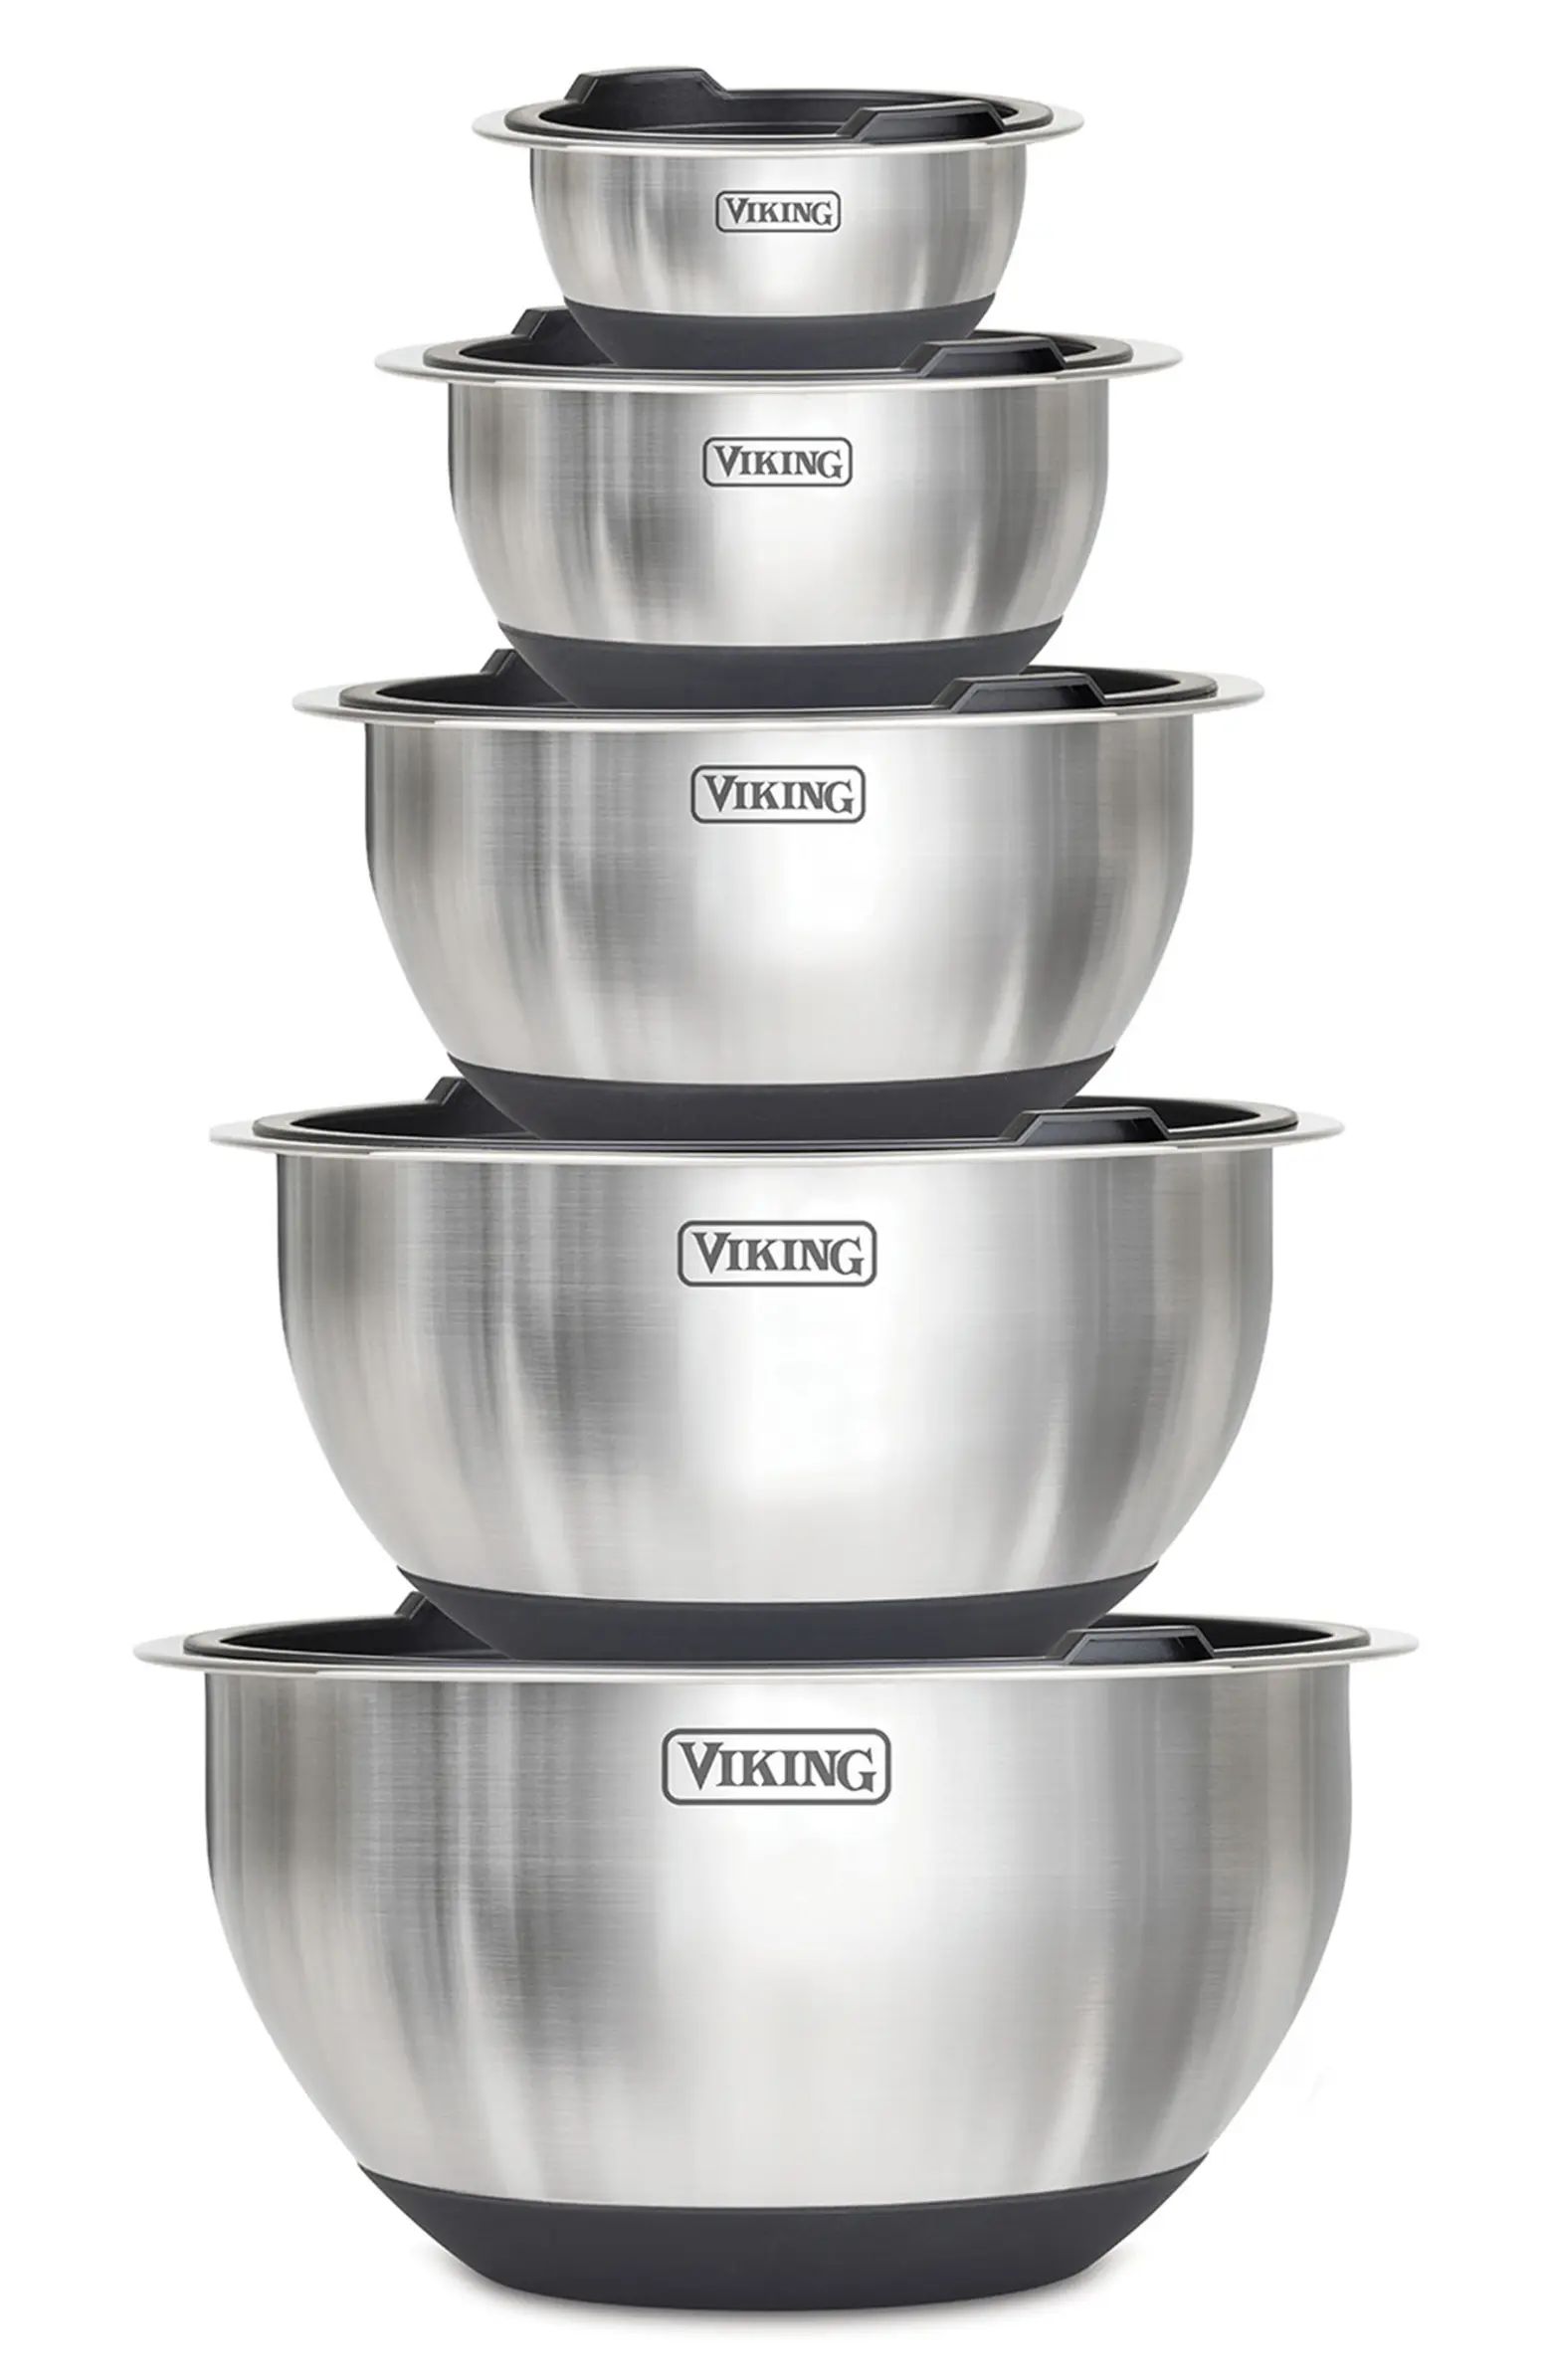 Stainless Steel 10-Piece Mixing Bowls | Nordstrom Rack